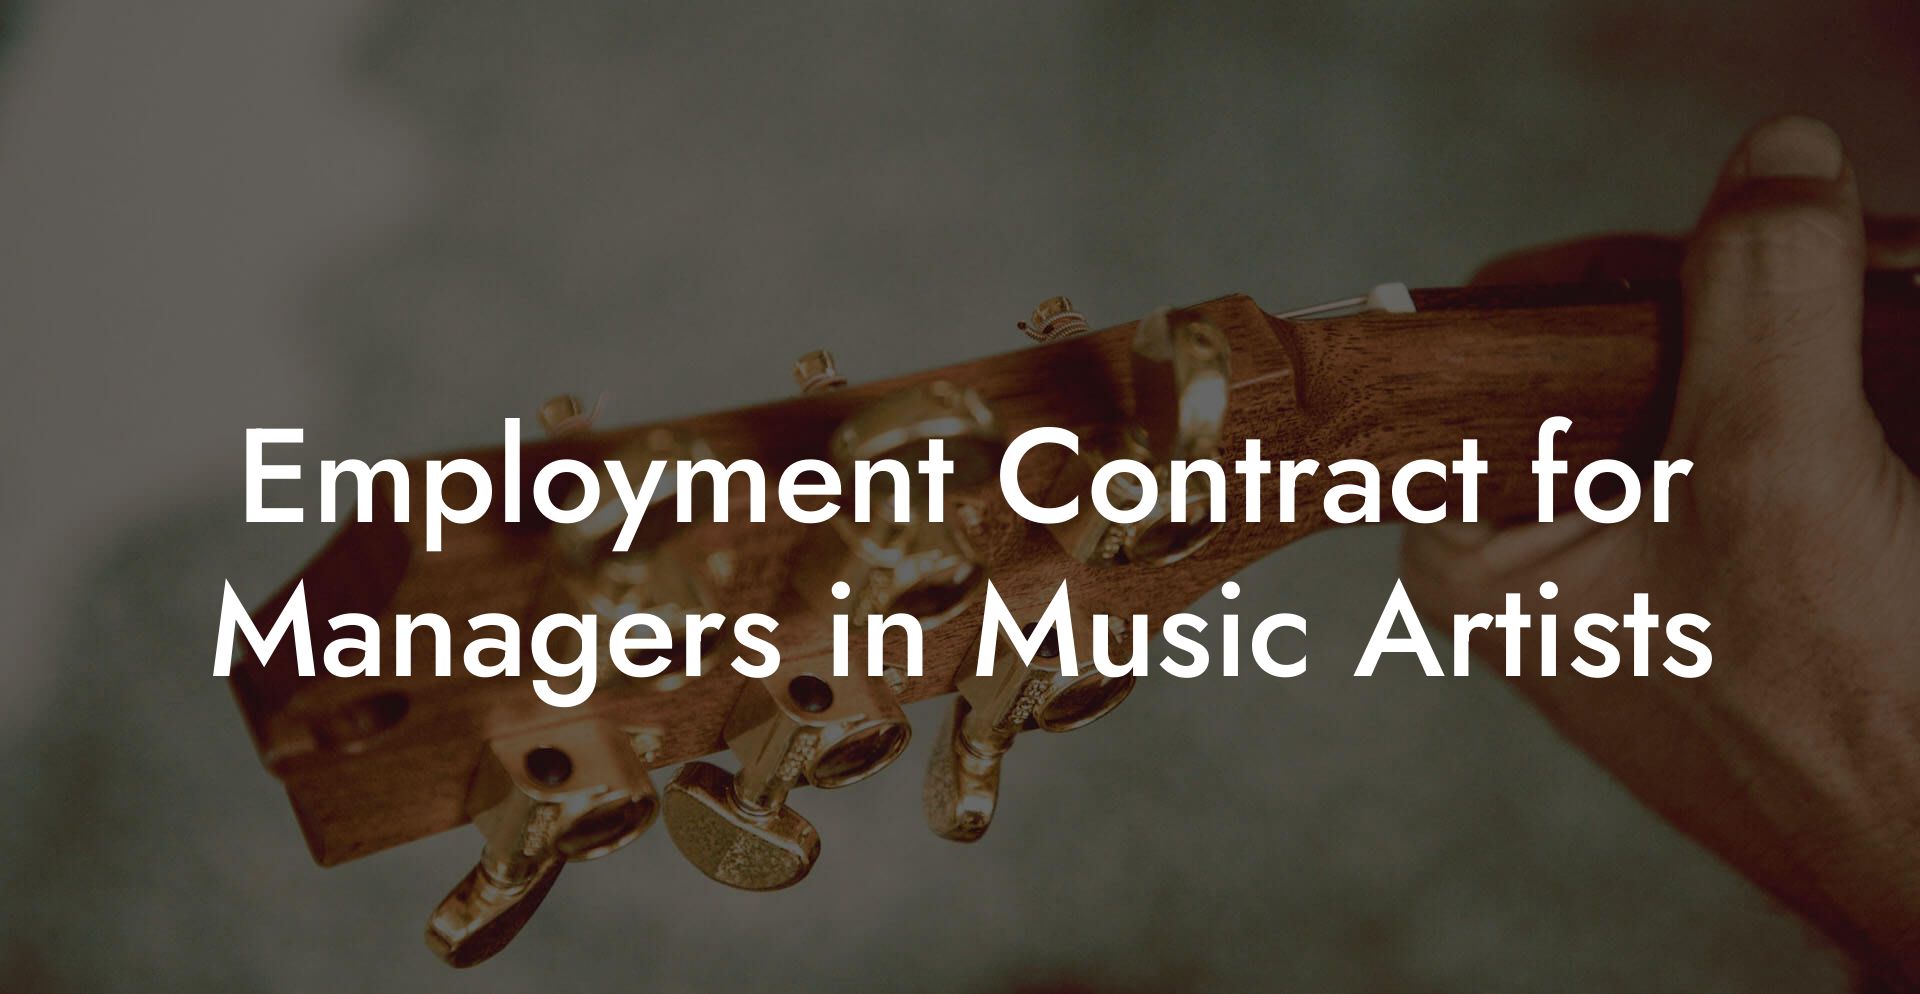 Employment Contract for Managers in Music Artists